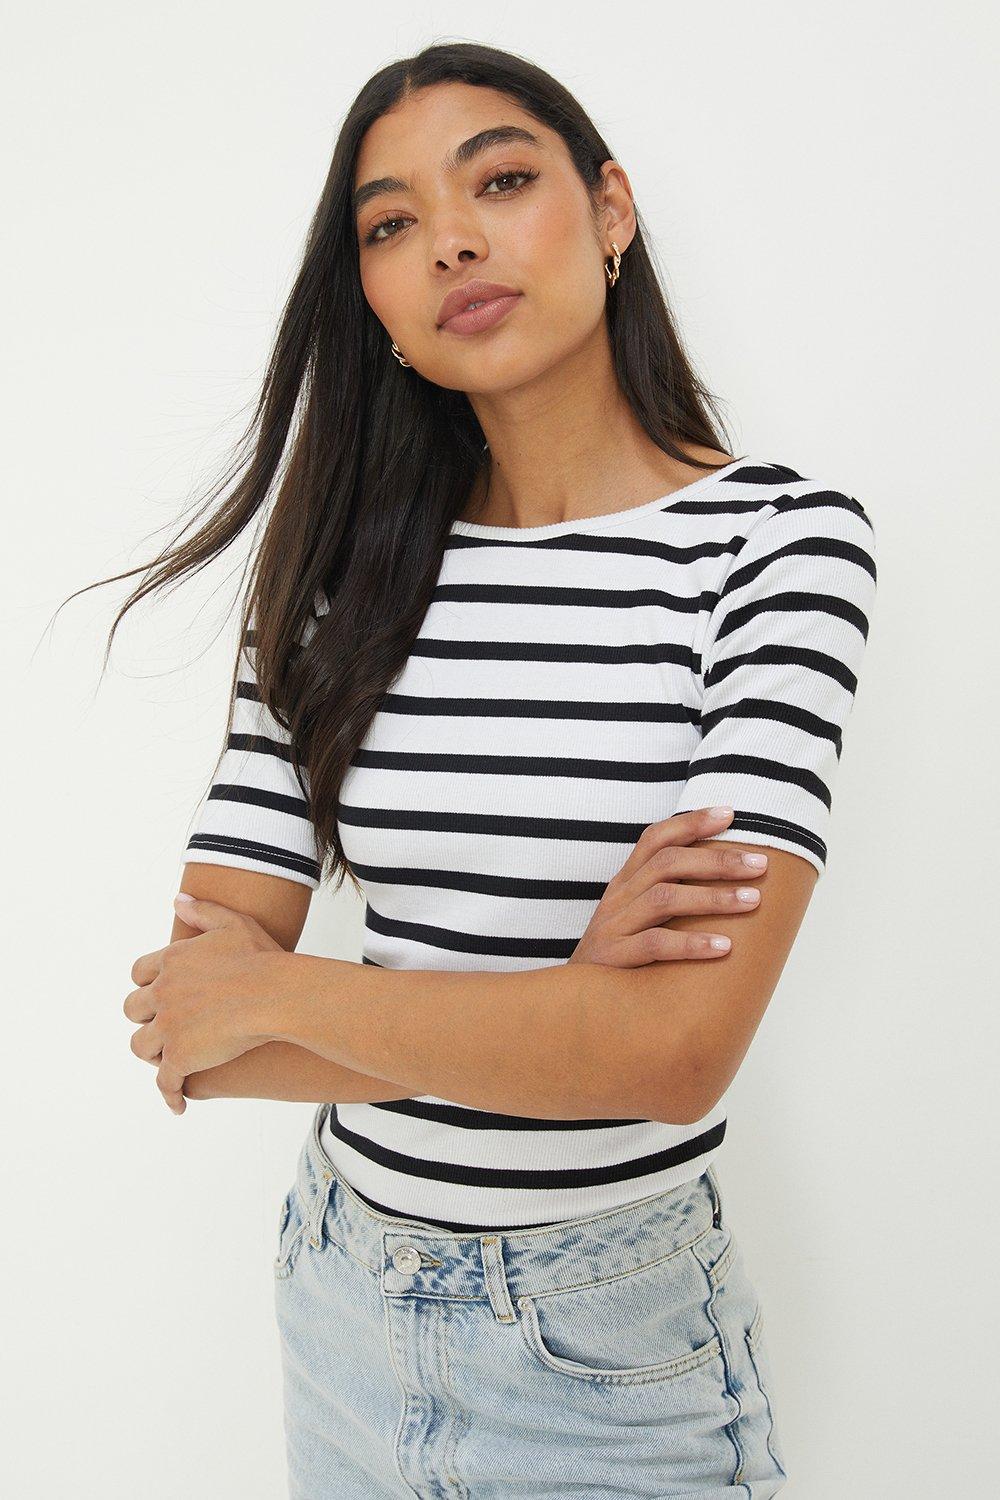 Women’s Rib Scoop Back Fitted Top - stripe - XL